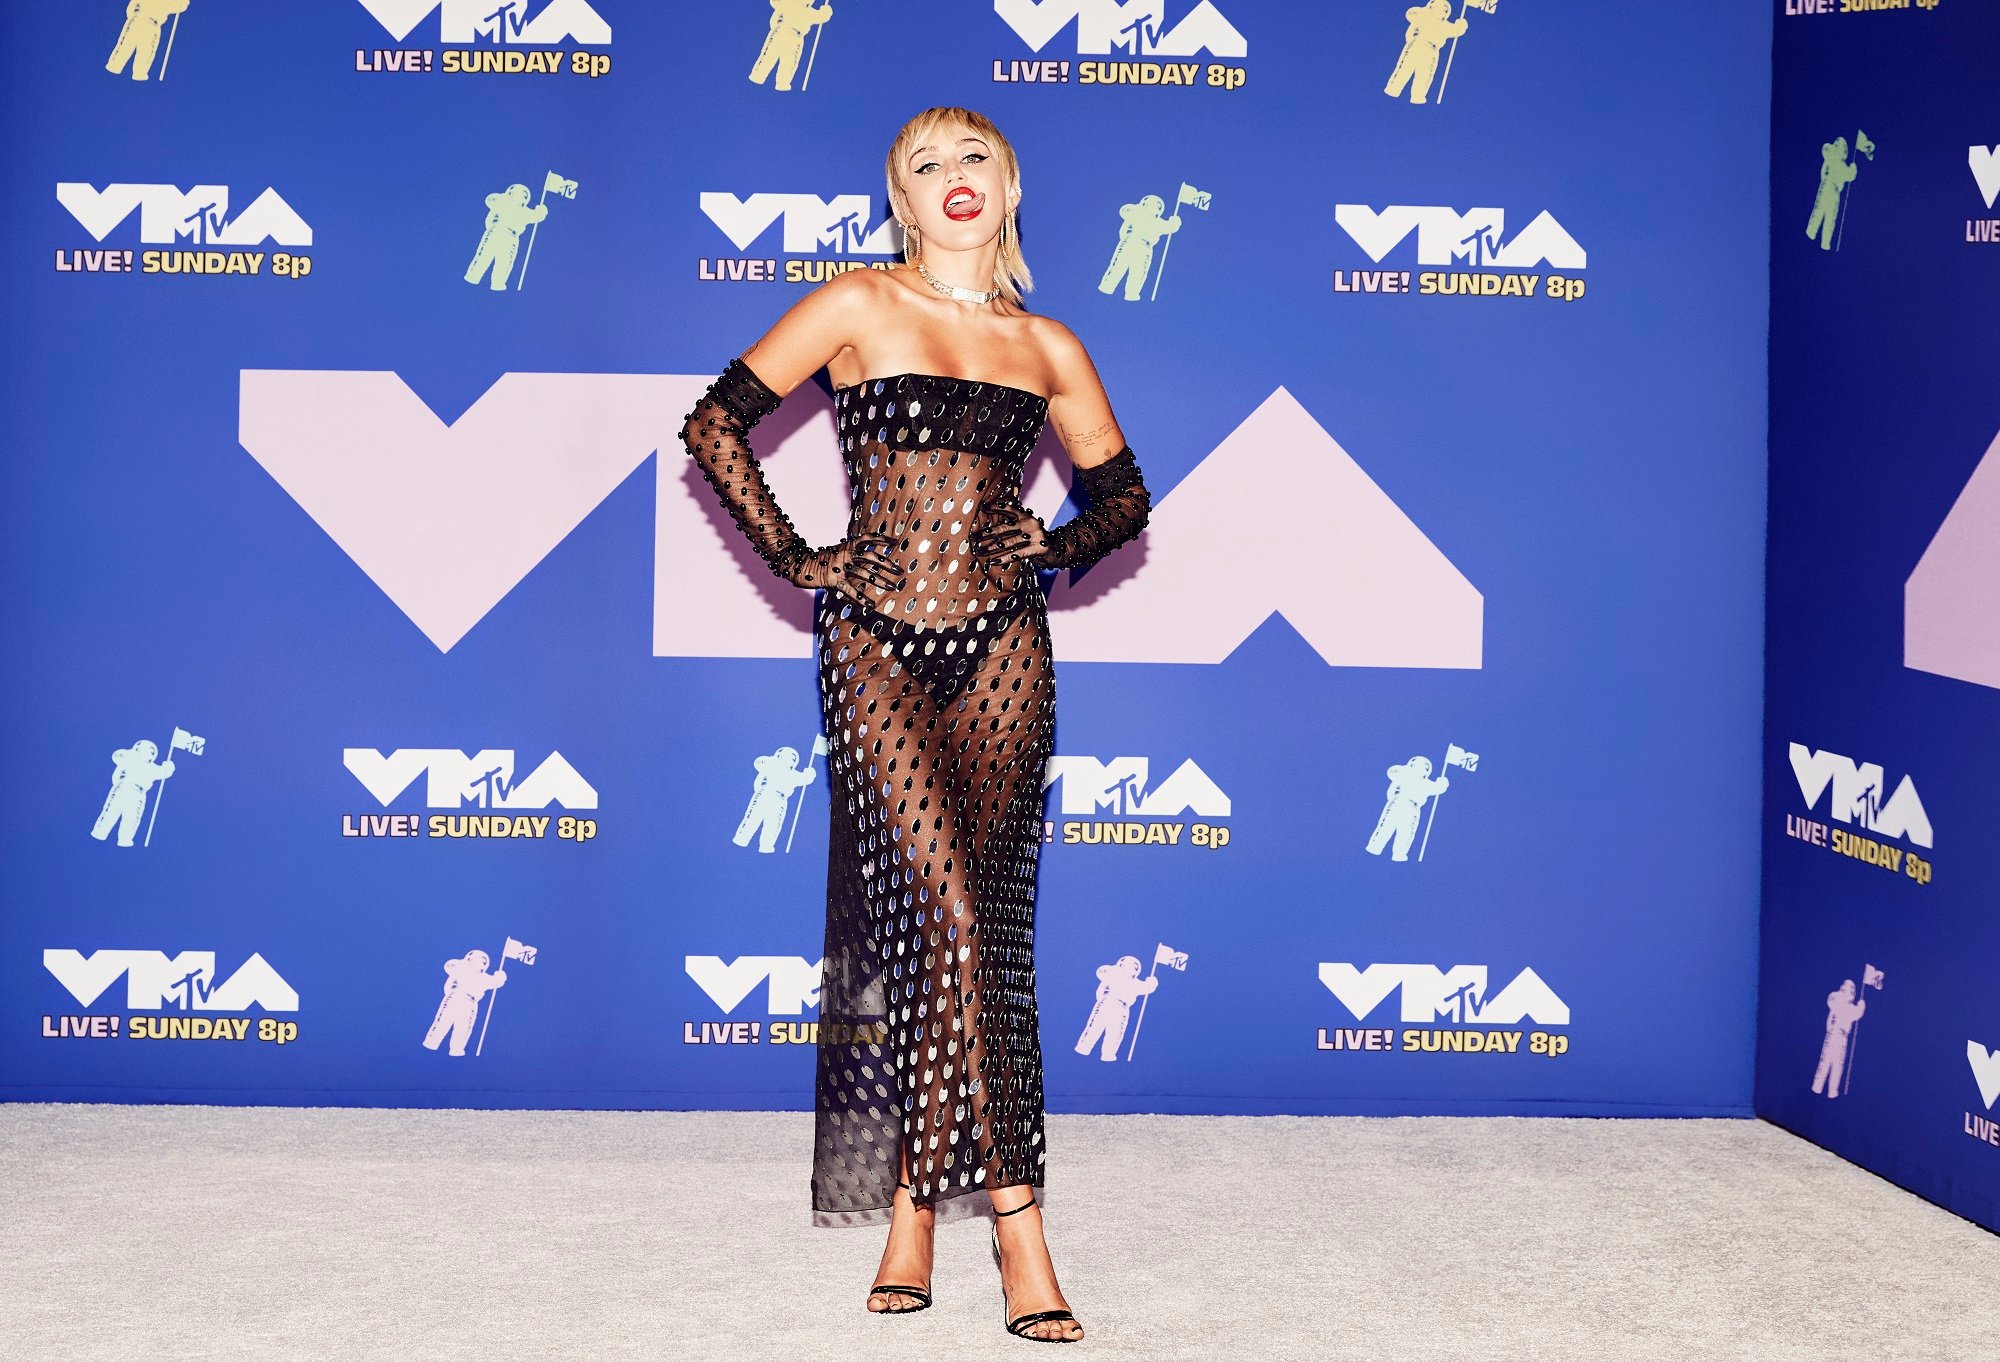 Miley Cyrus attends the 2020 MTV Video Music Awards, broadcast on Sunday, August 30, 2020 in New York City.